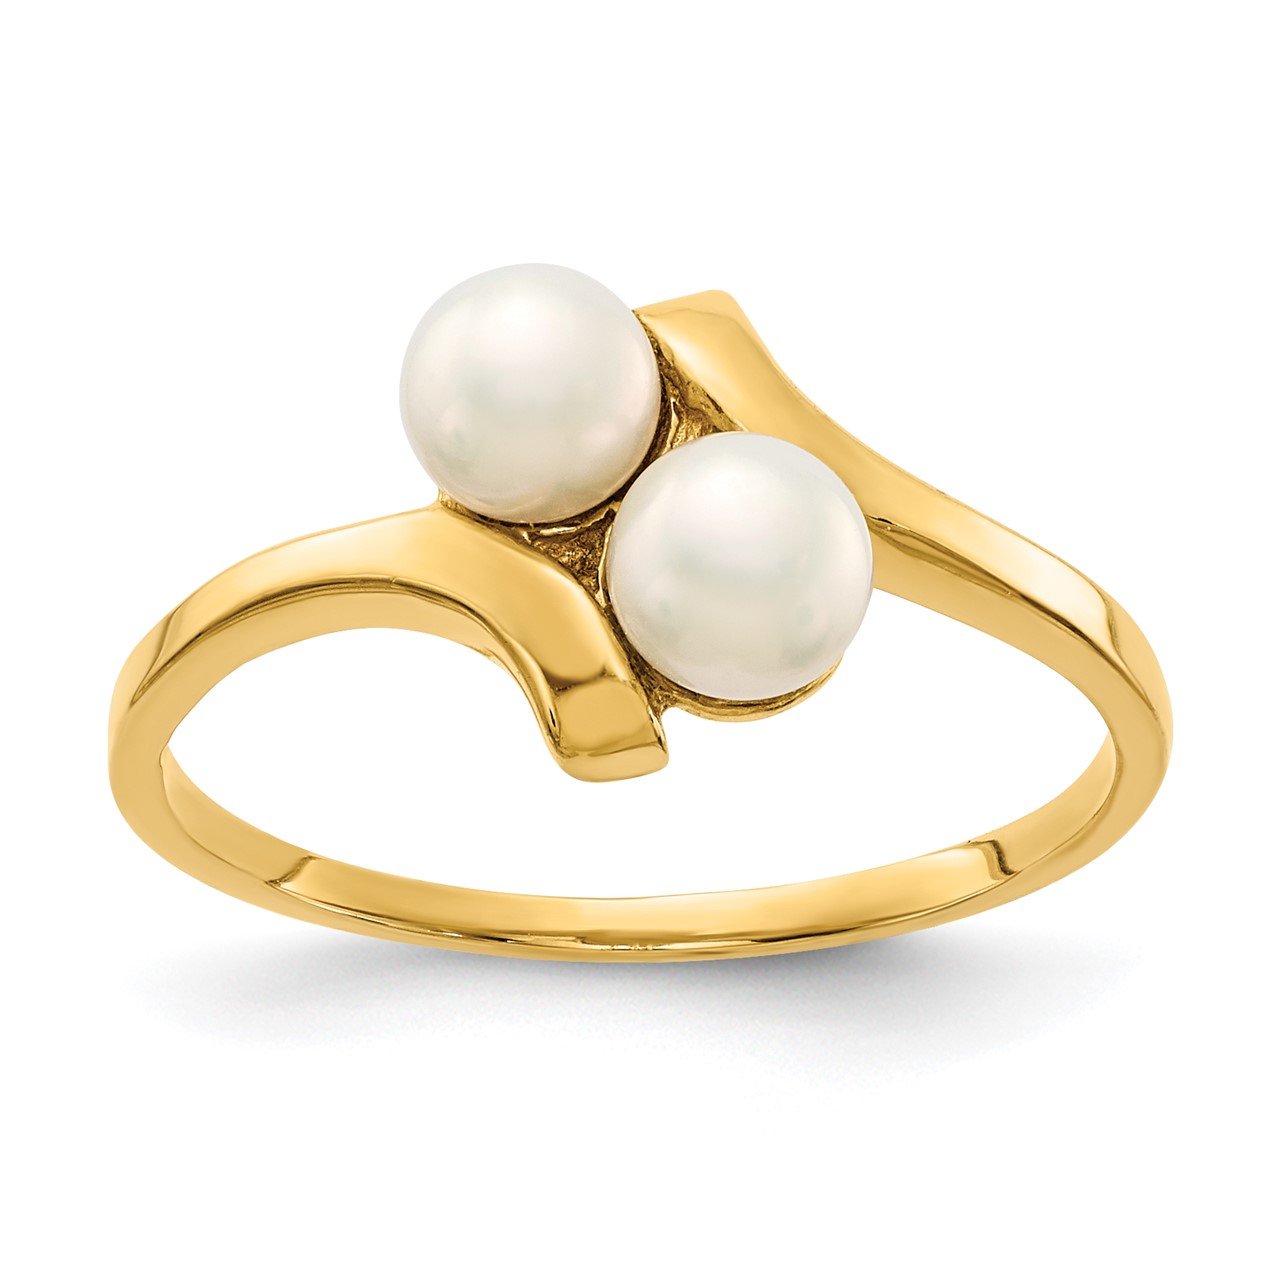 14K 4-5mm White Button Freshwater Cultured 2 Pearl Ring